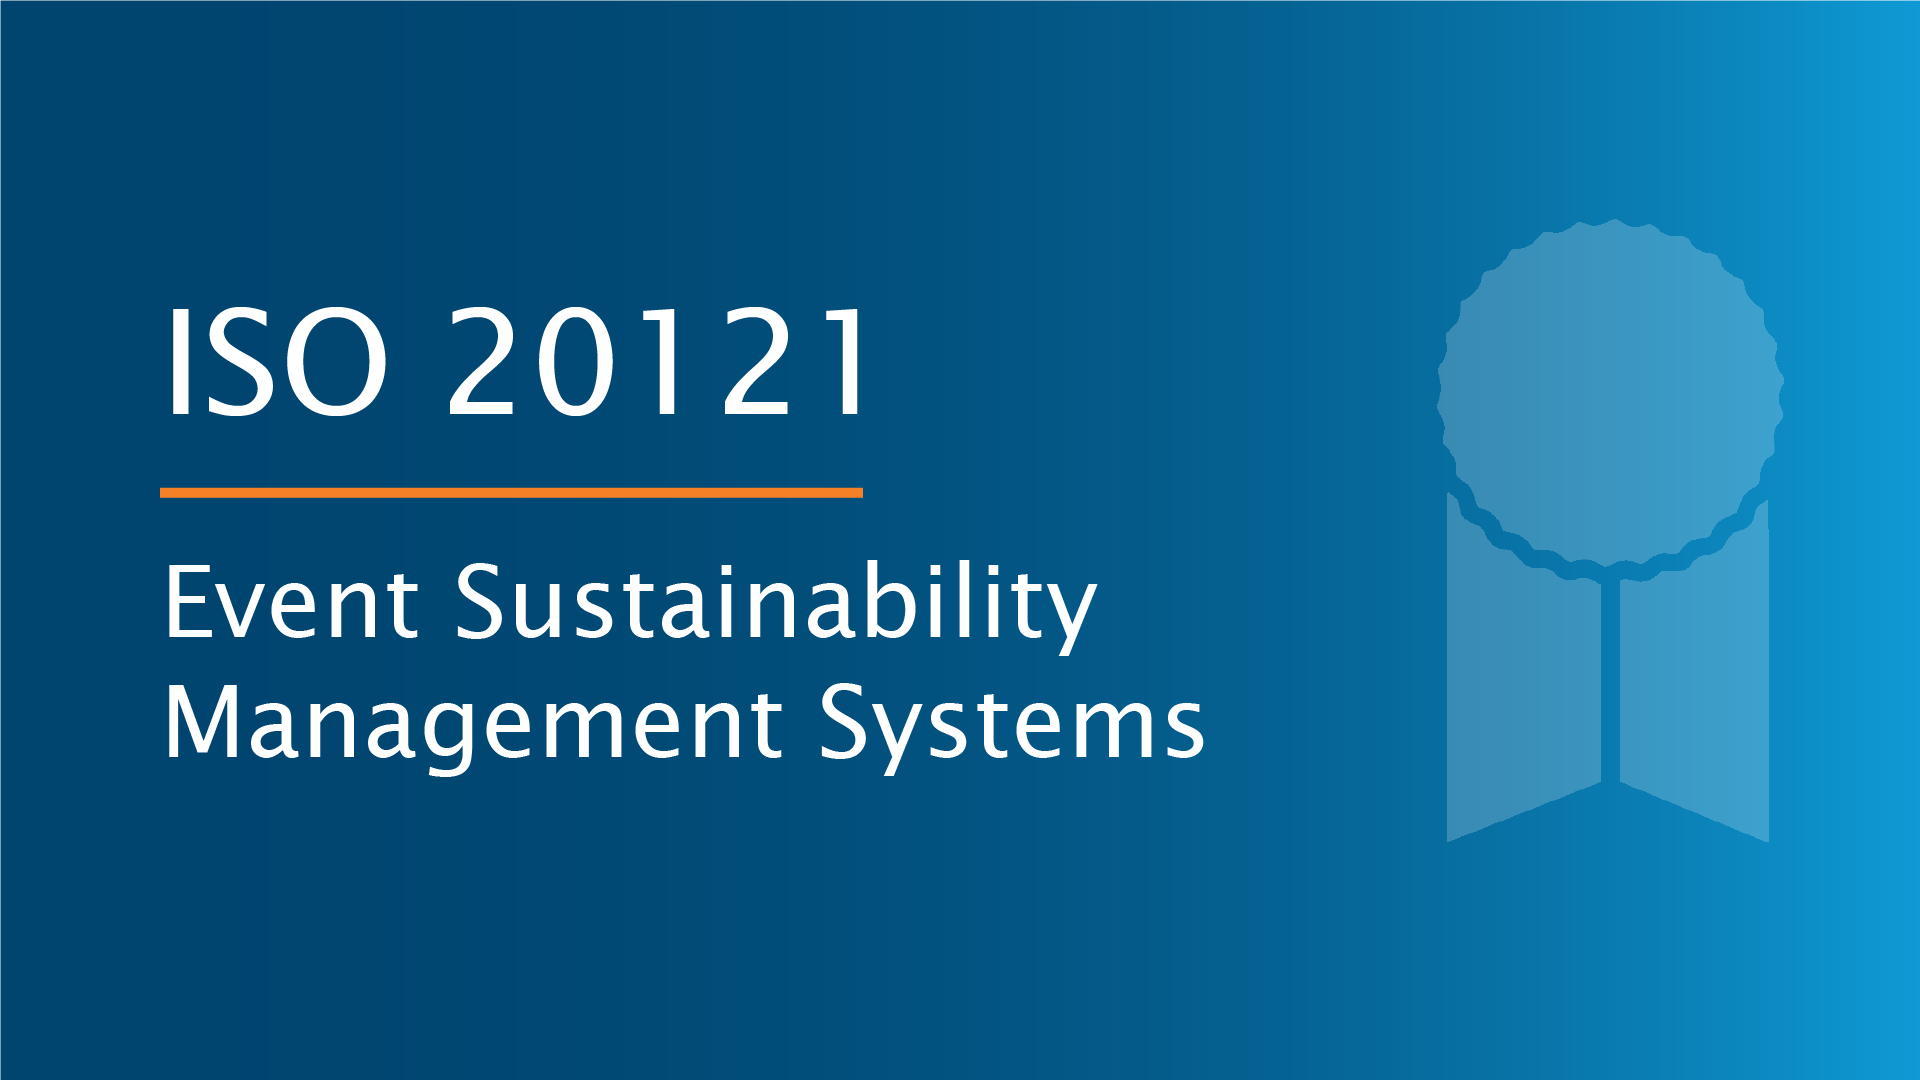 ISO 20121 - Event sustainability management systems